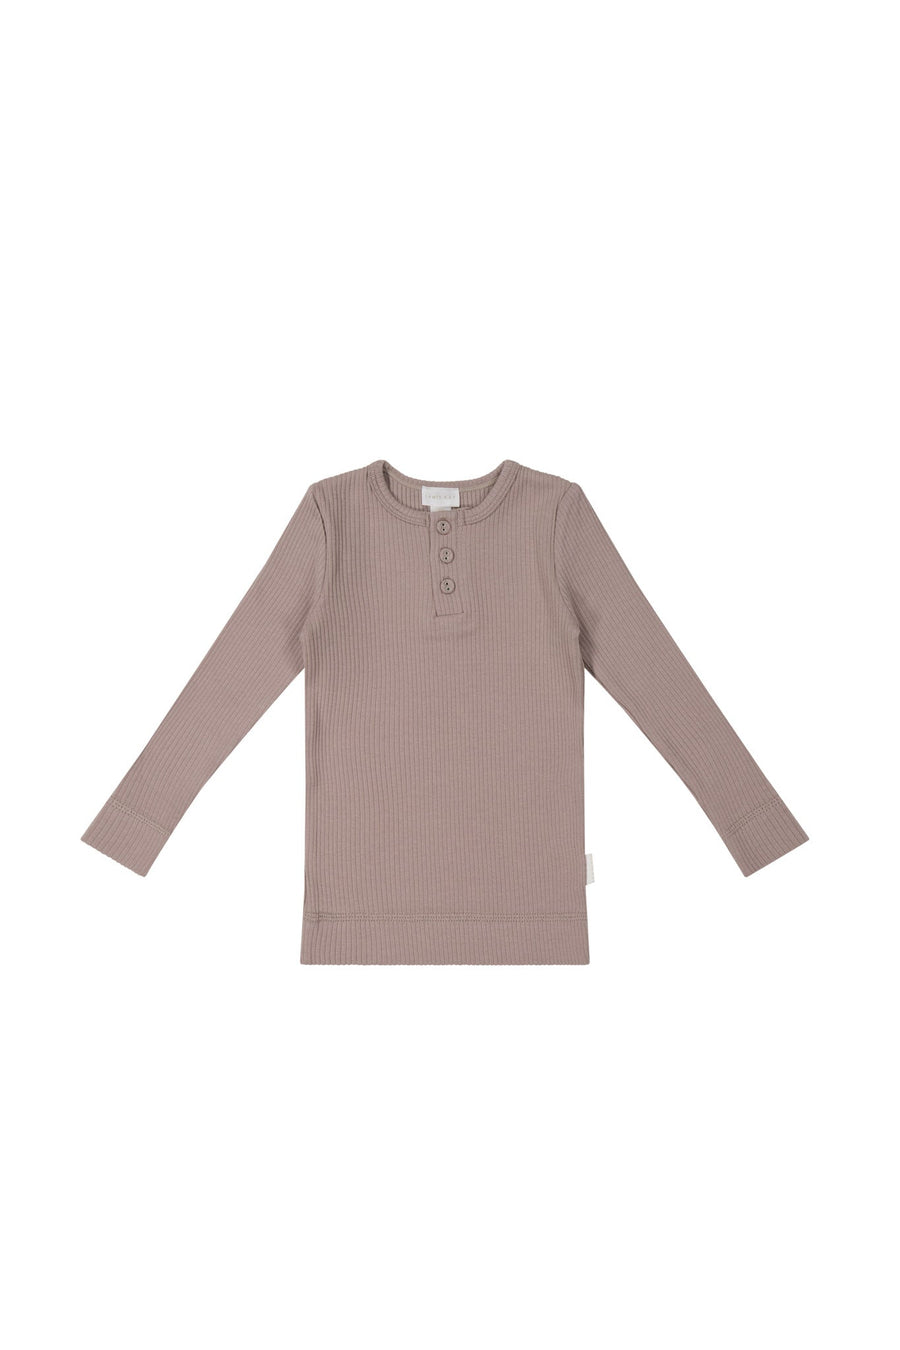 Organic Cotton Modal Long Sleeve Henley - Softest Mauve Childrens Top from Jamie Kay USA